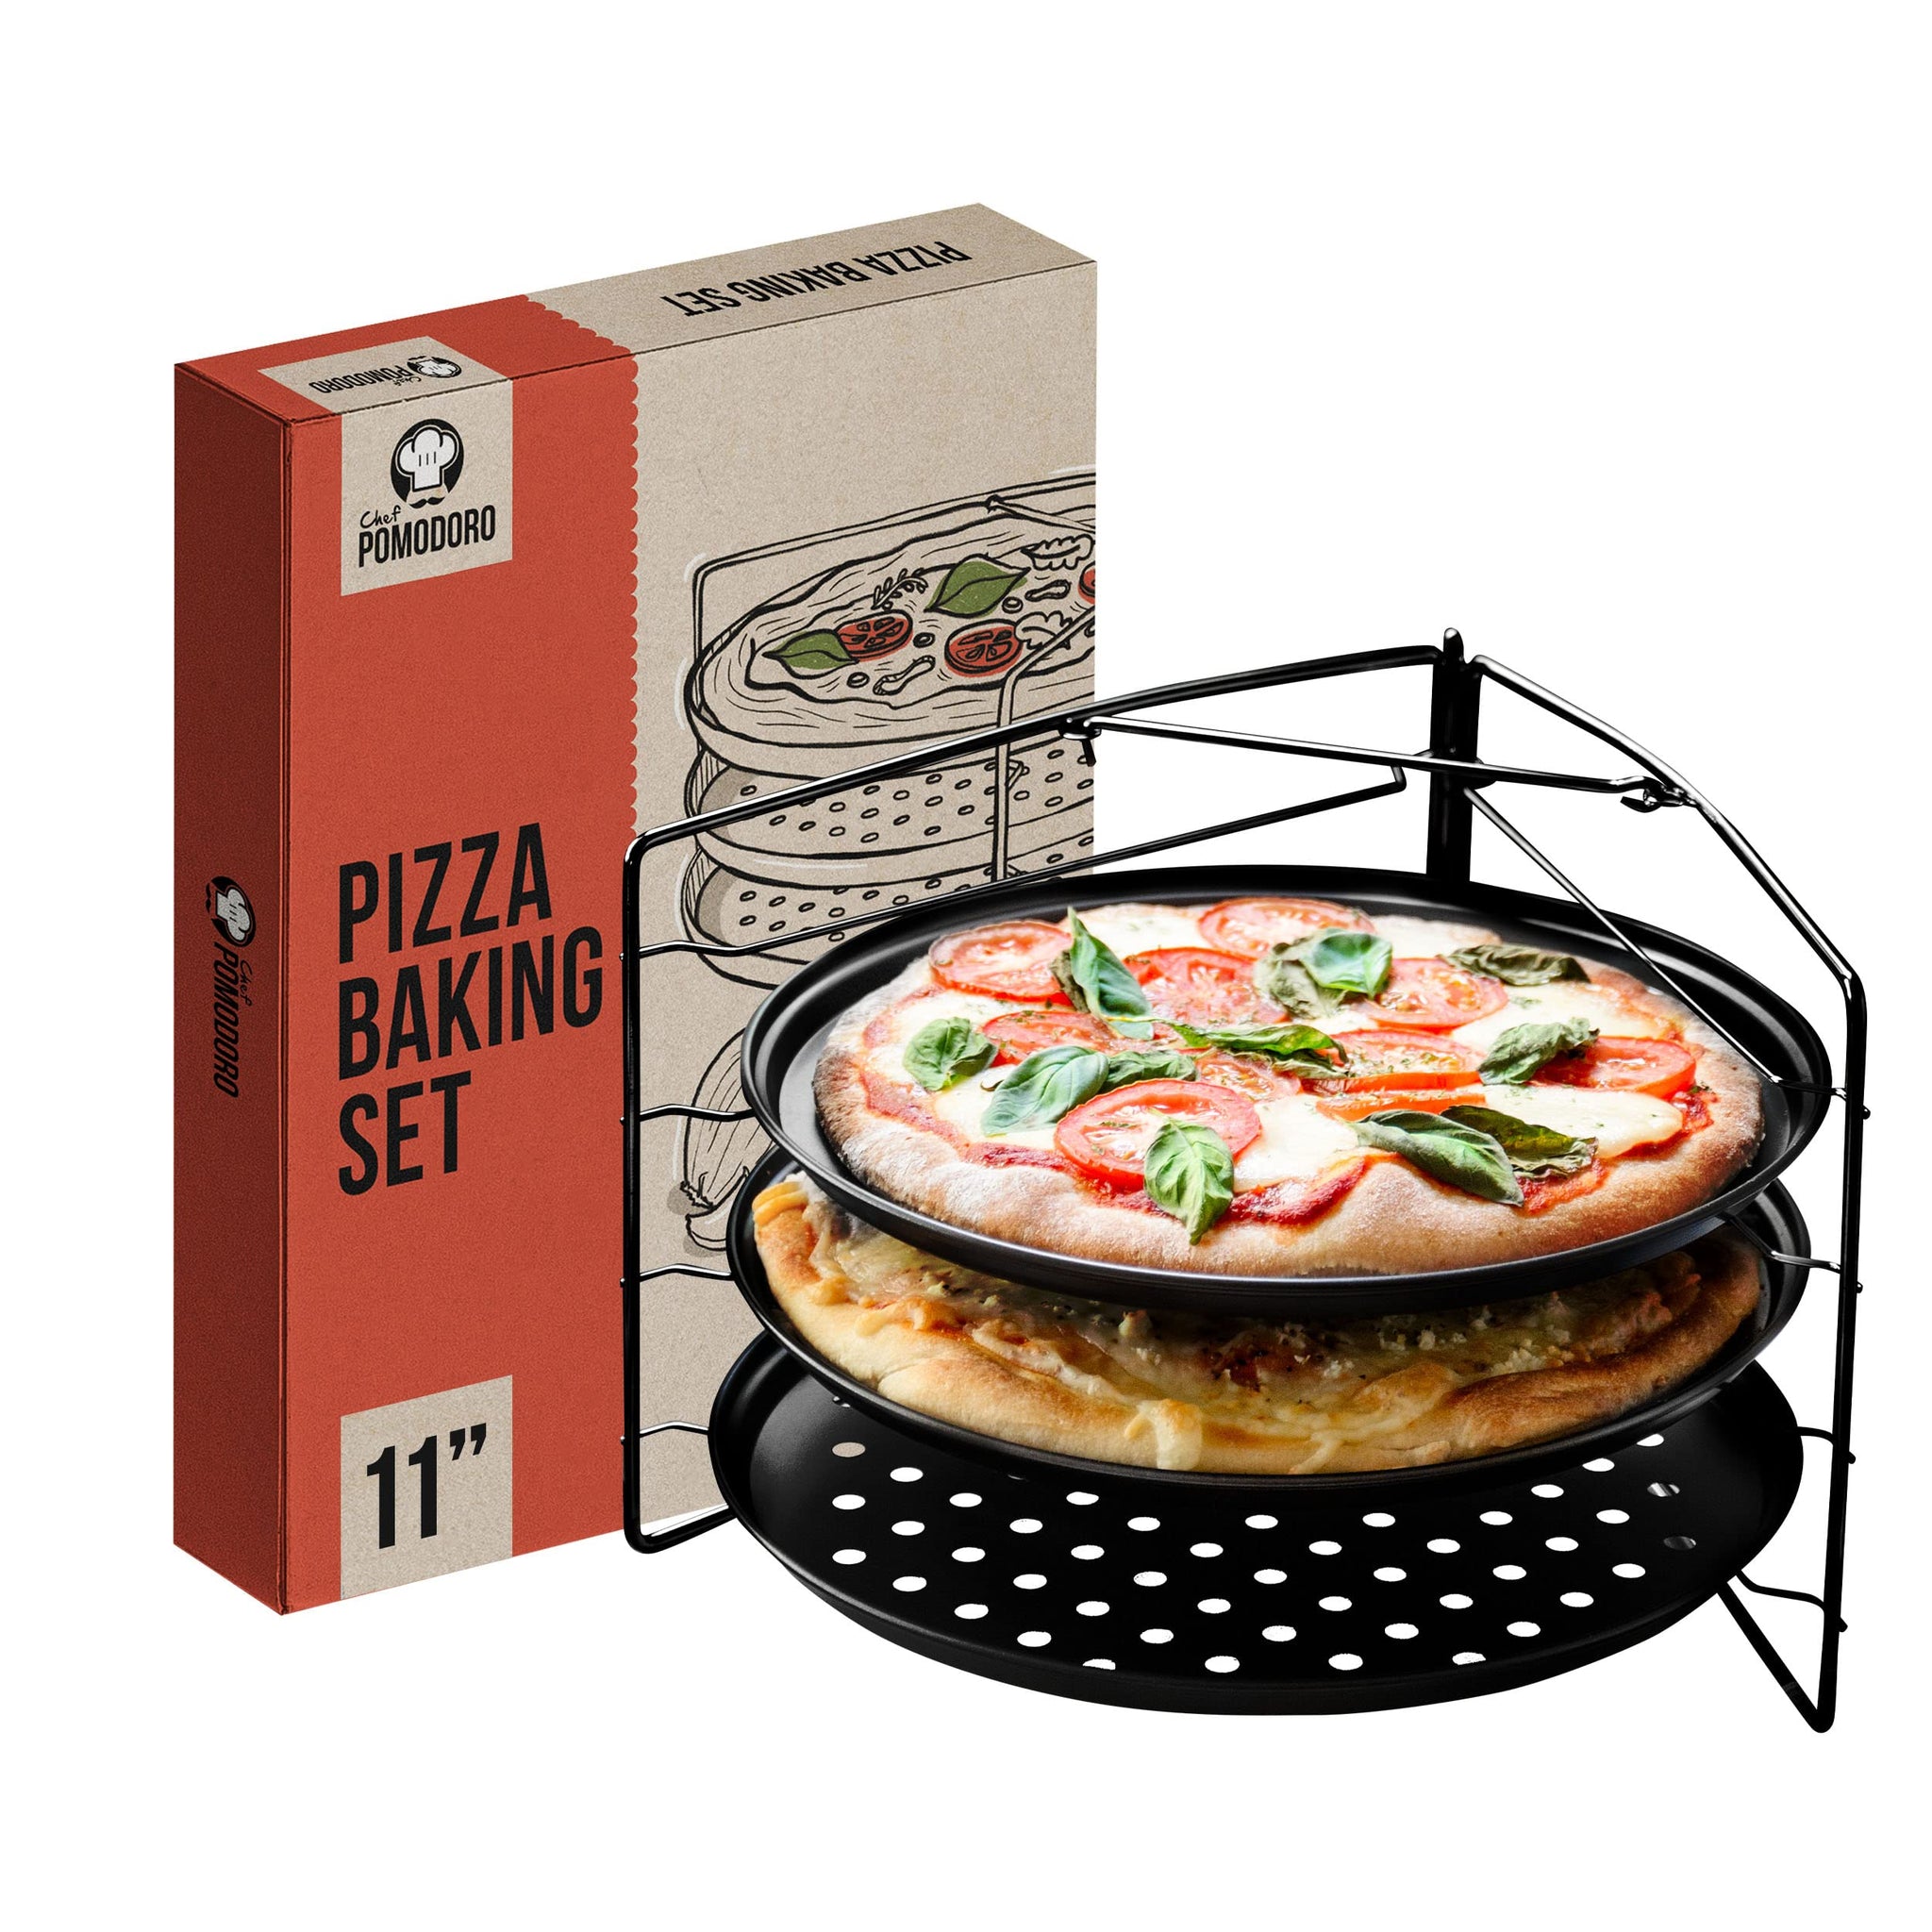 Chef Pomodoro Pizza Baking Set with 3 Pizza Pans and Pizza Rack, (11-Inch  Pans), Non-stick Perforated Pizza Trays for Oven, Grill, Pizza Pan with